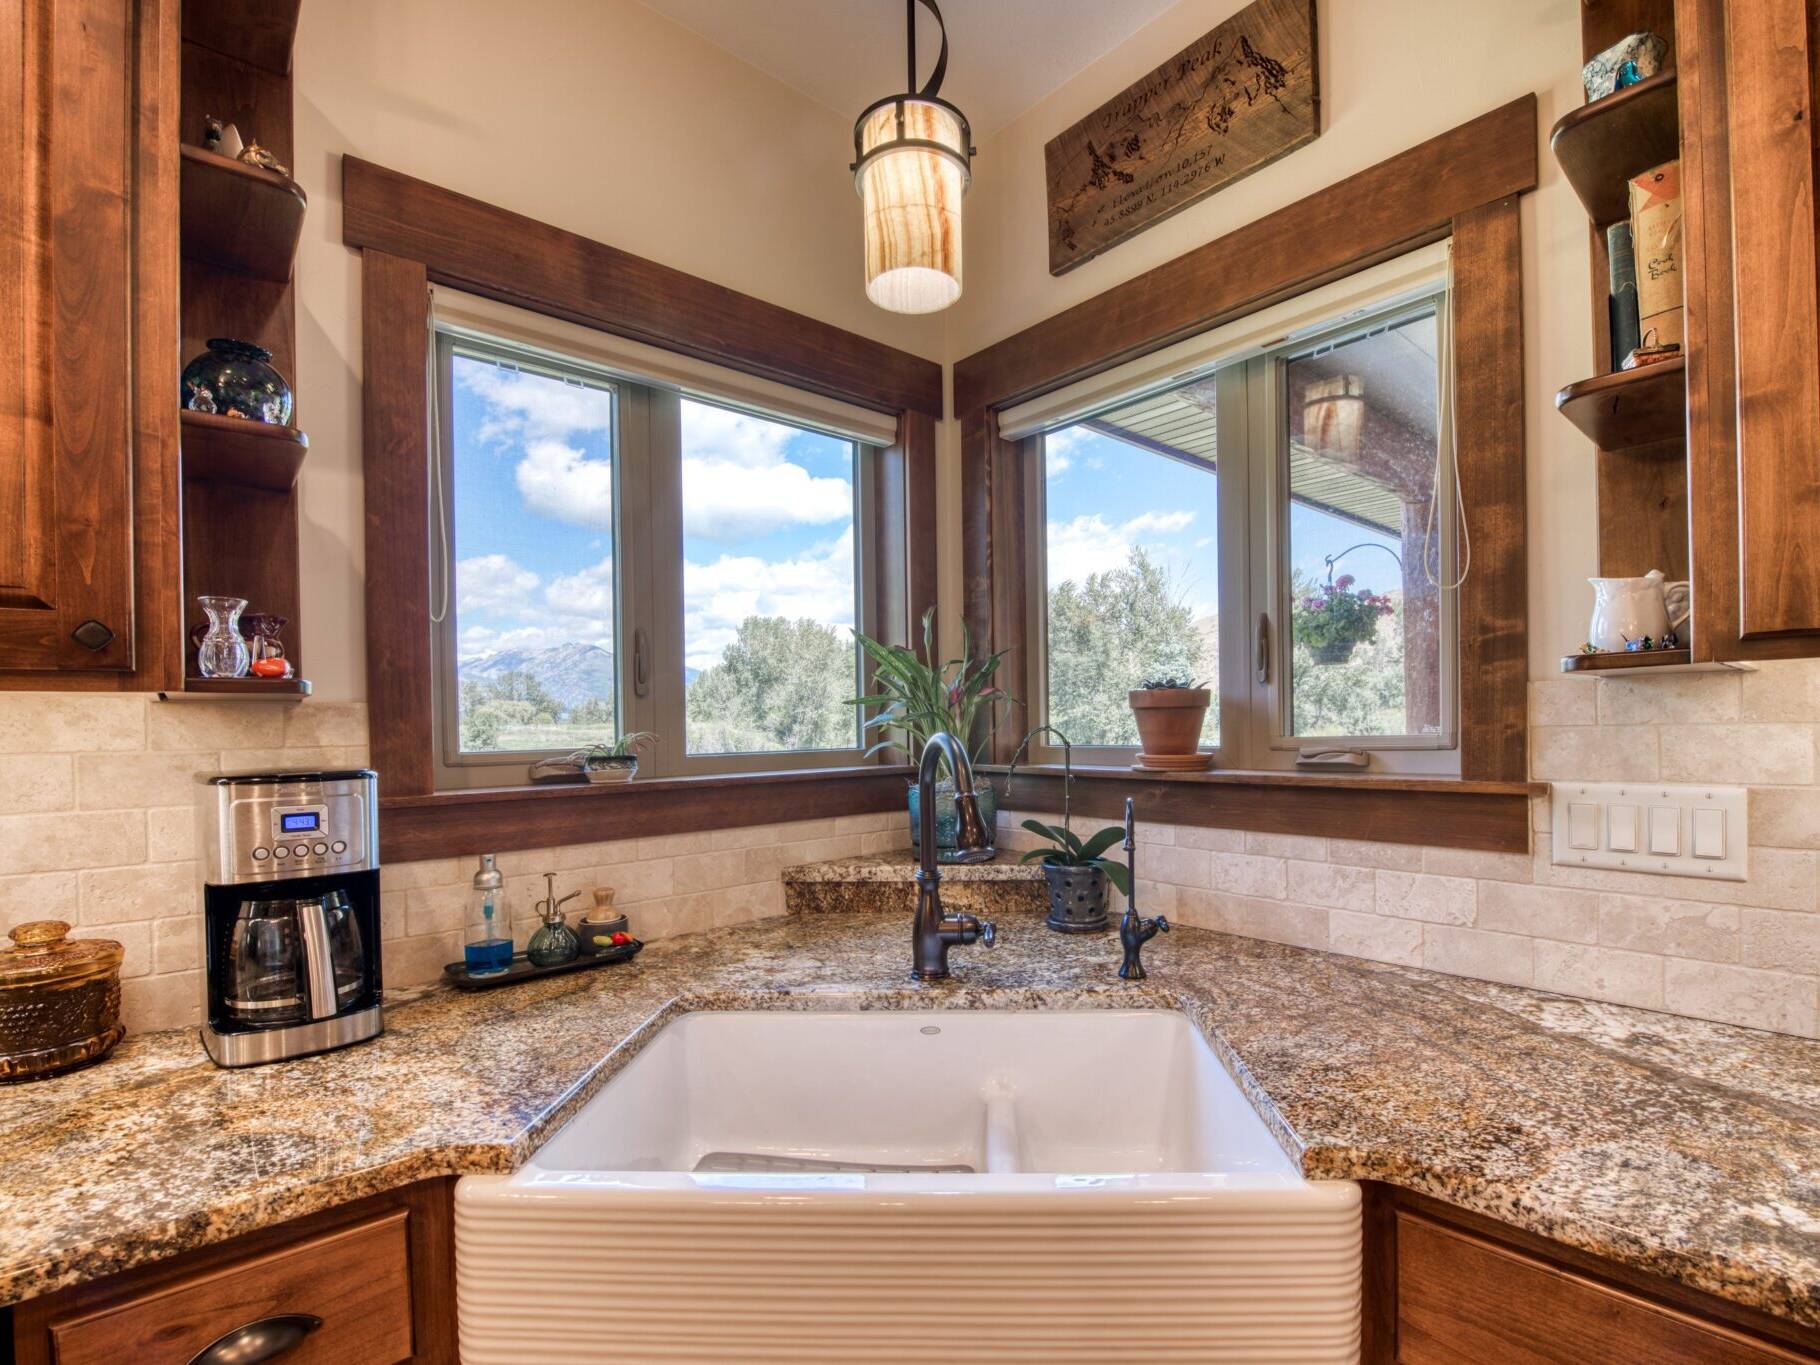 Farm-style kitchen sink in a corner cabinet with granite countertops, tile backsplash and two windows above in a custom home near Hamilton, MT